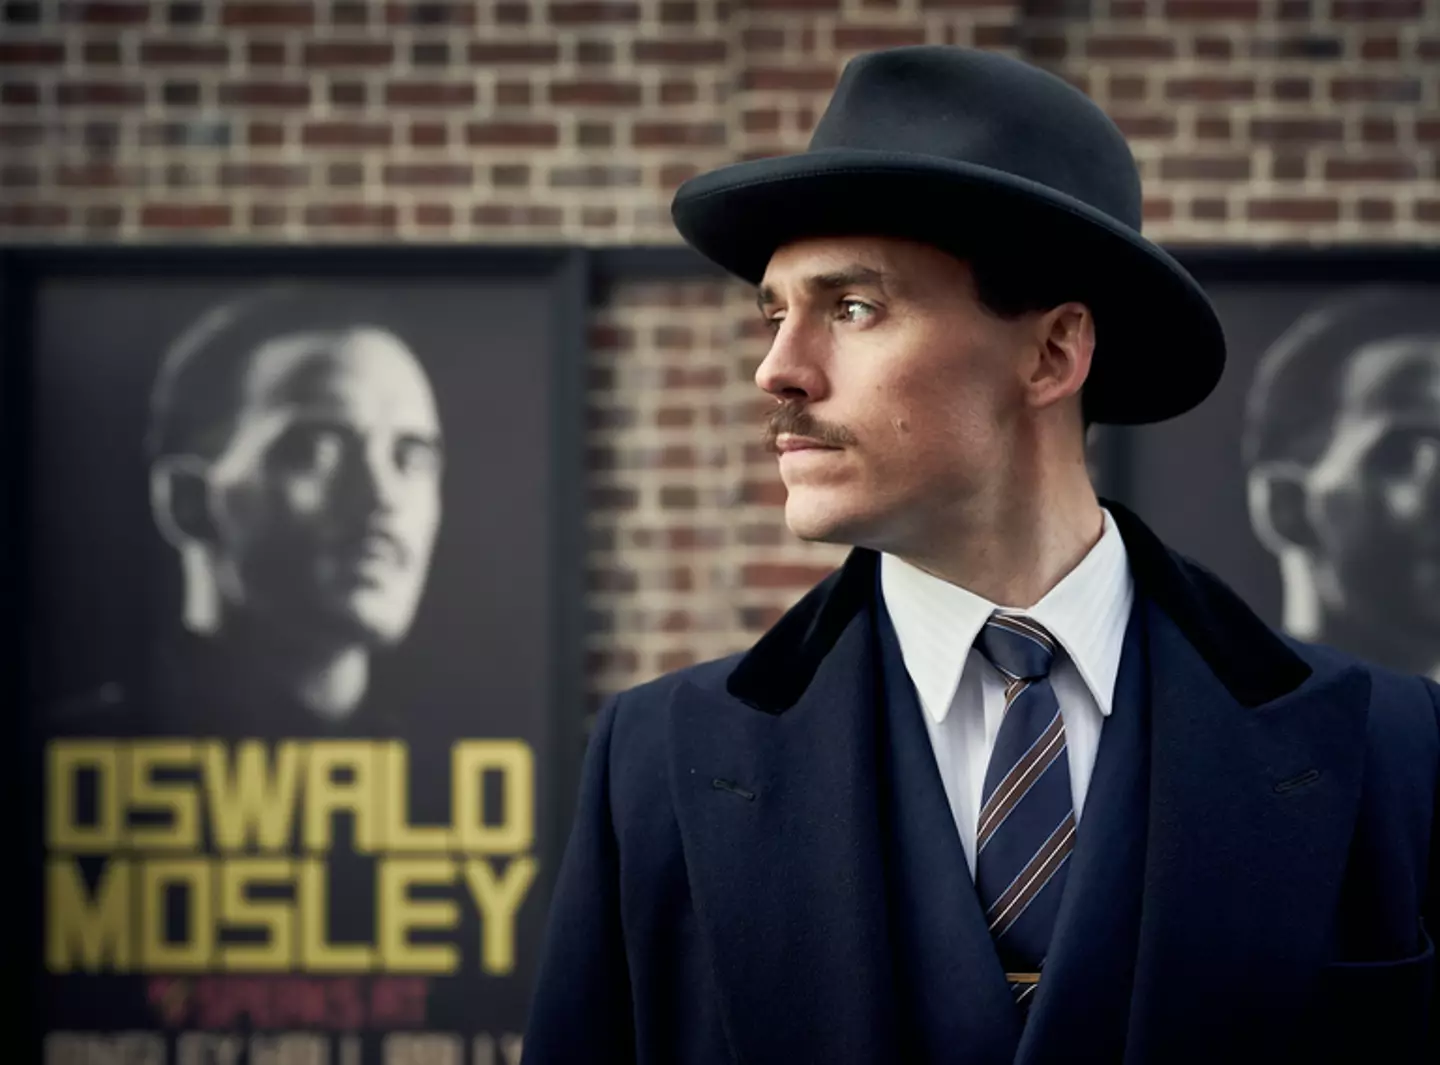 Sam Claflin is reprising his role of Oswald Mosley this season (